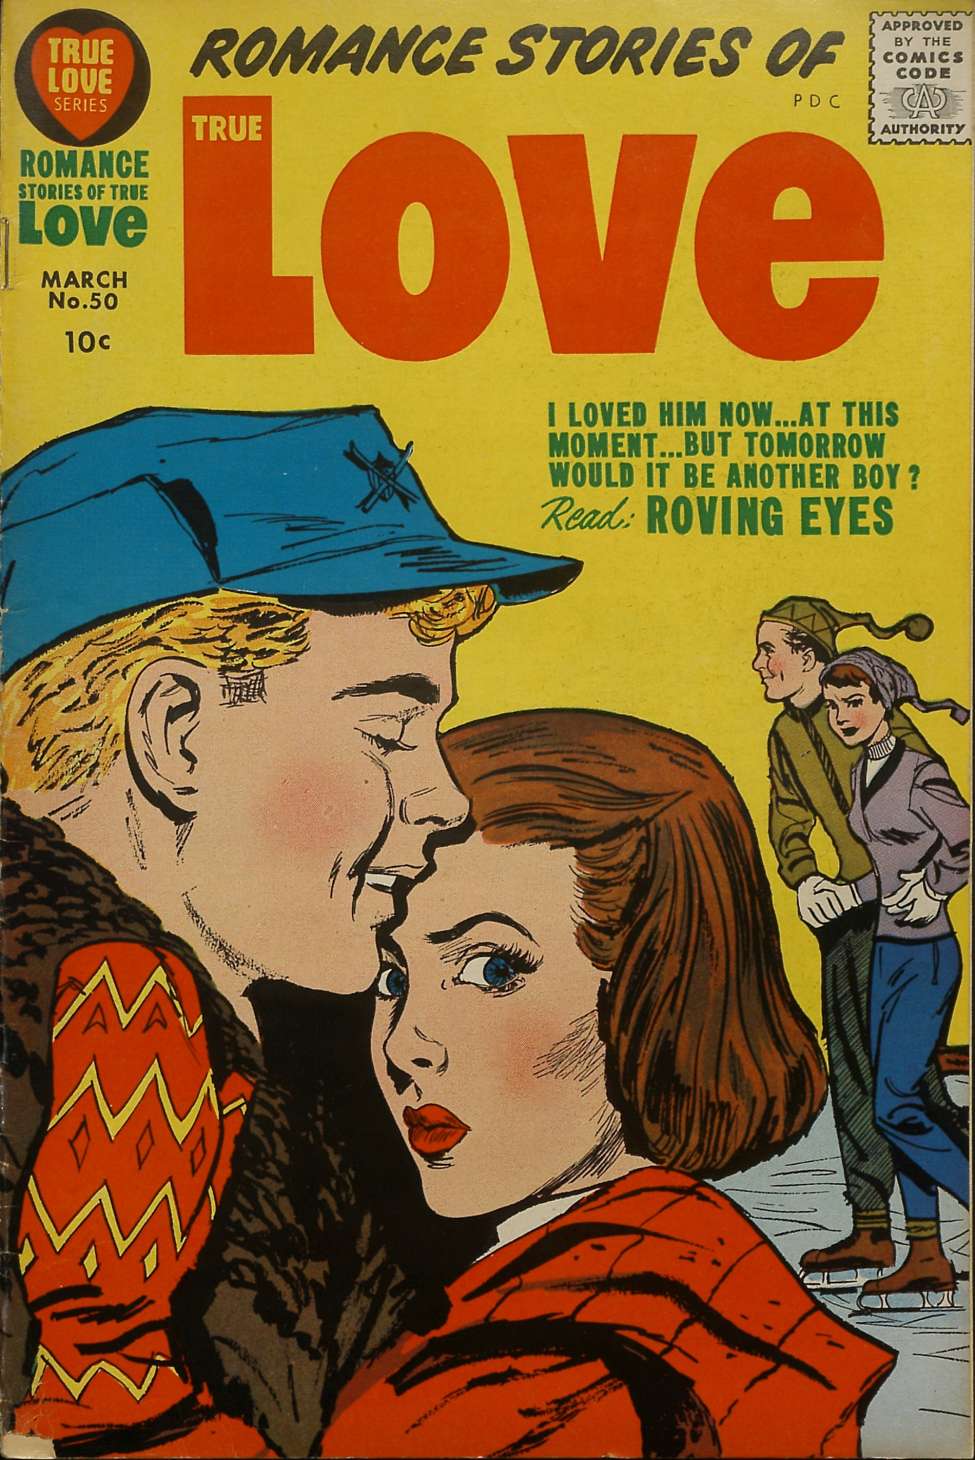 Comic Book Cover For Romance Stories of True Love 50